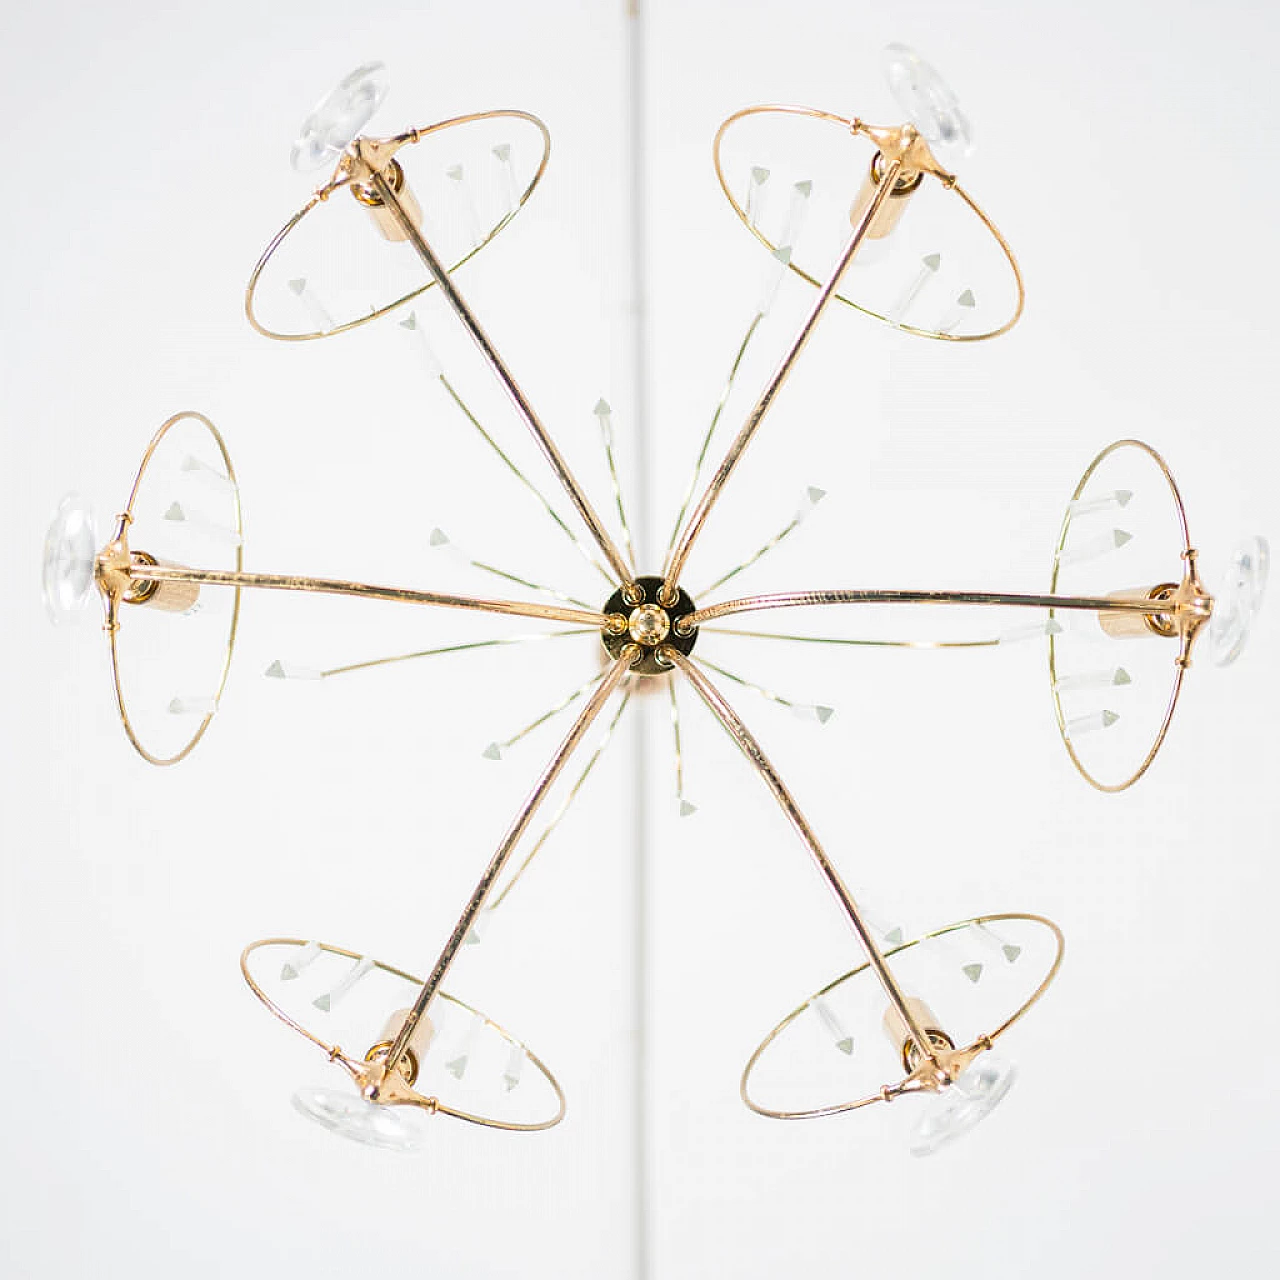 Brass chandelier with 6 lights, 60s 1206889